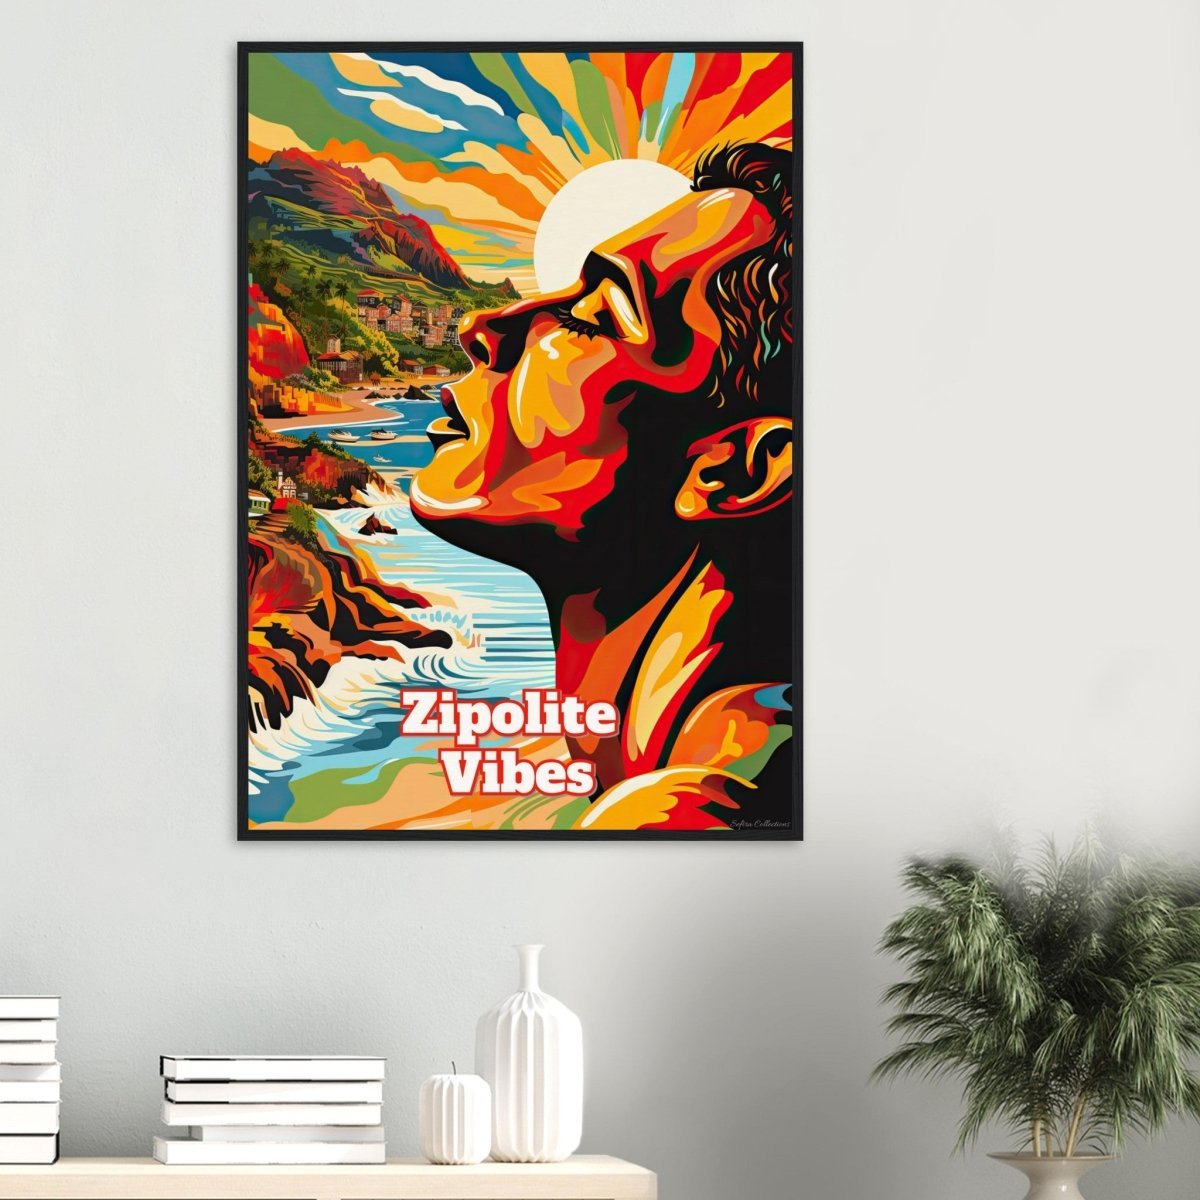 Sefira Zipolite Vibes (v1) Museum-Quality Matte Paper Wooden Framed Poster | Sefira Art Gallery - Print Material - Sefira Collections